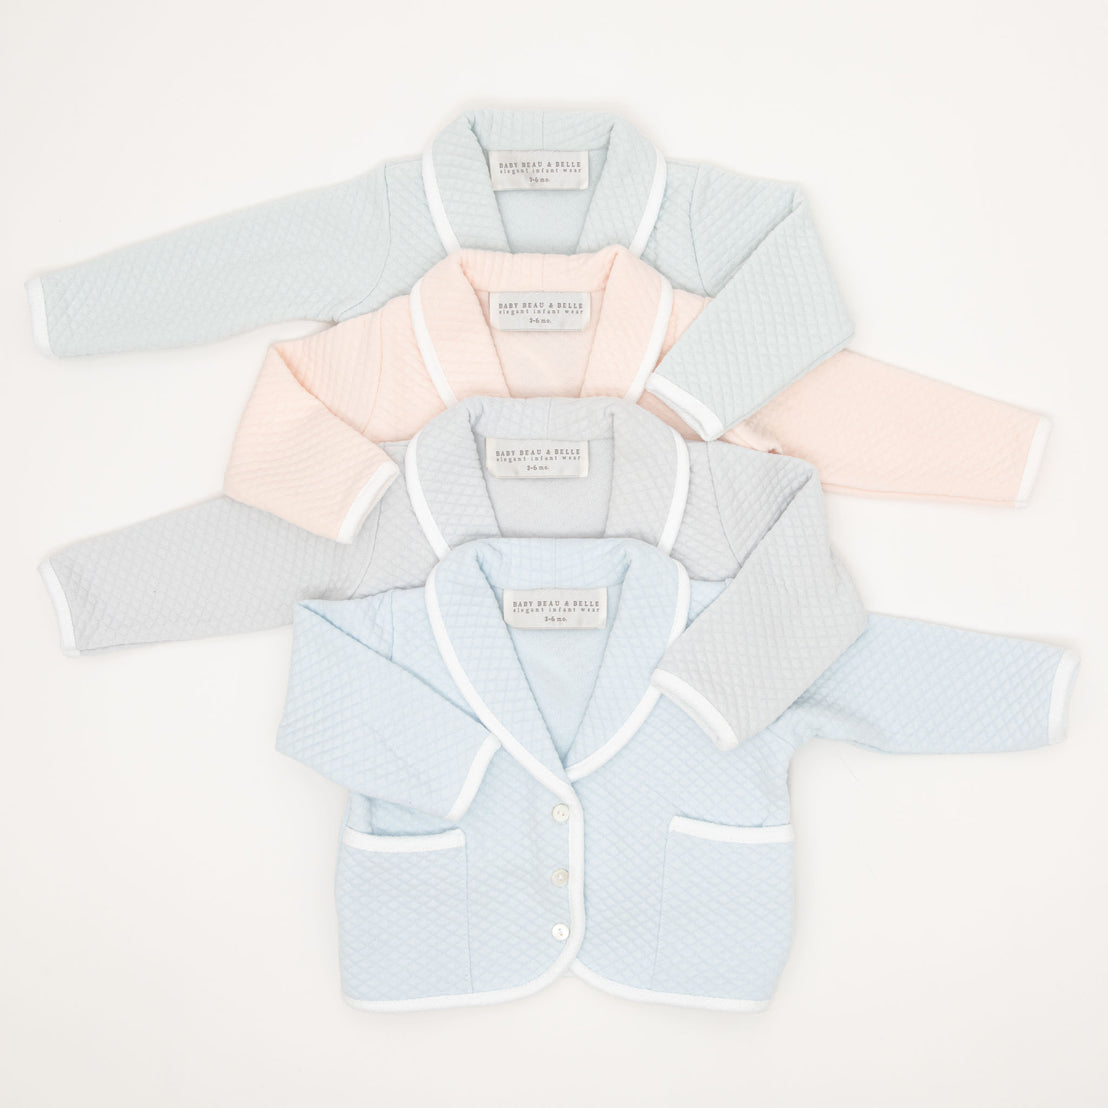 Flat lay photo of the four available colors that the Asher Baby Boy Jacket comes in, including grey, pink, powder blue, and soft teal.